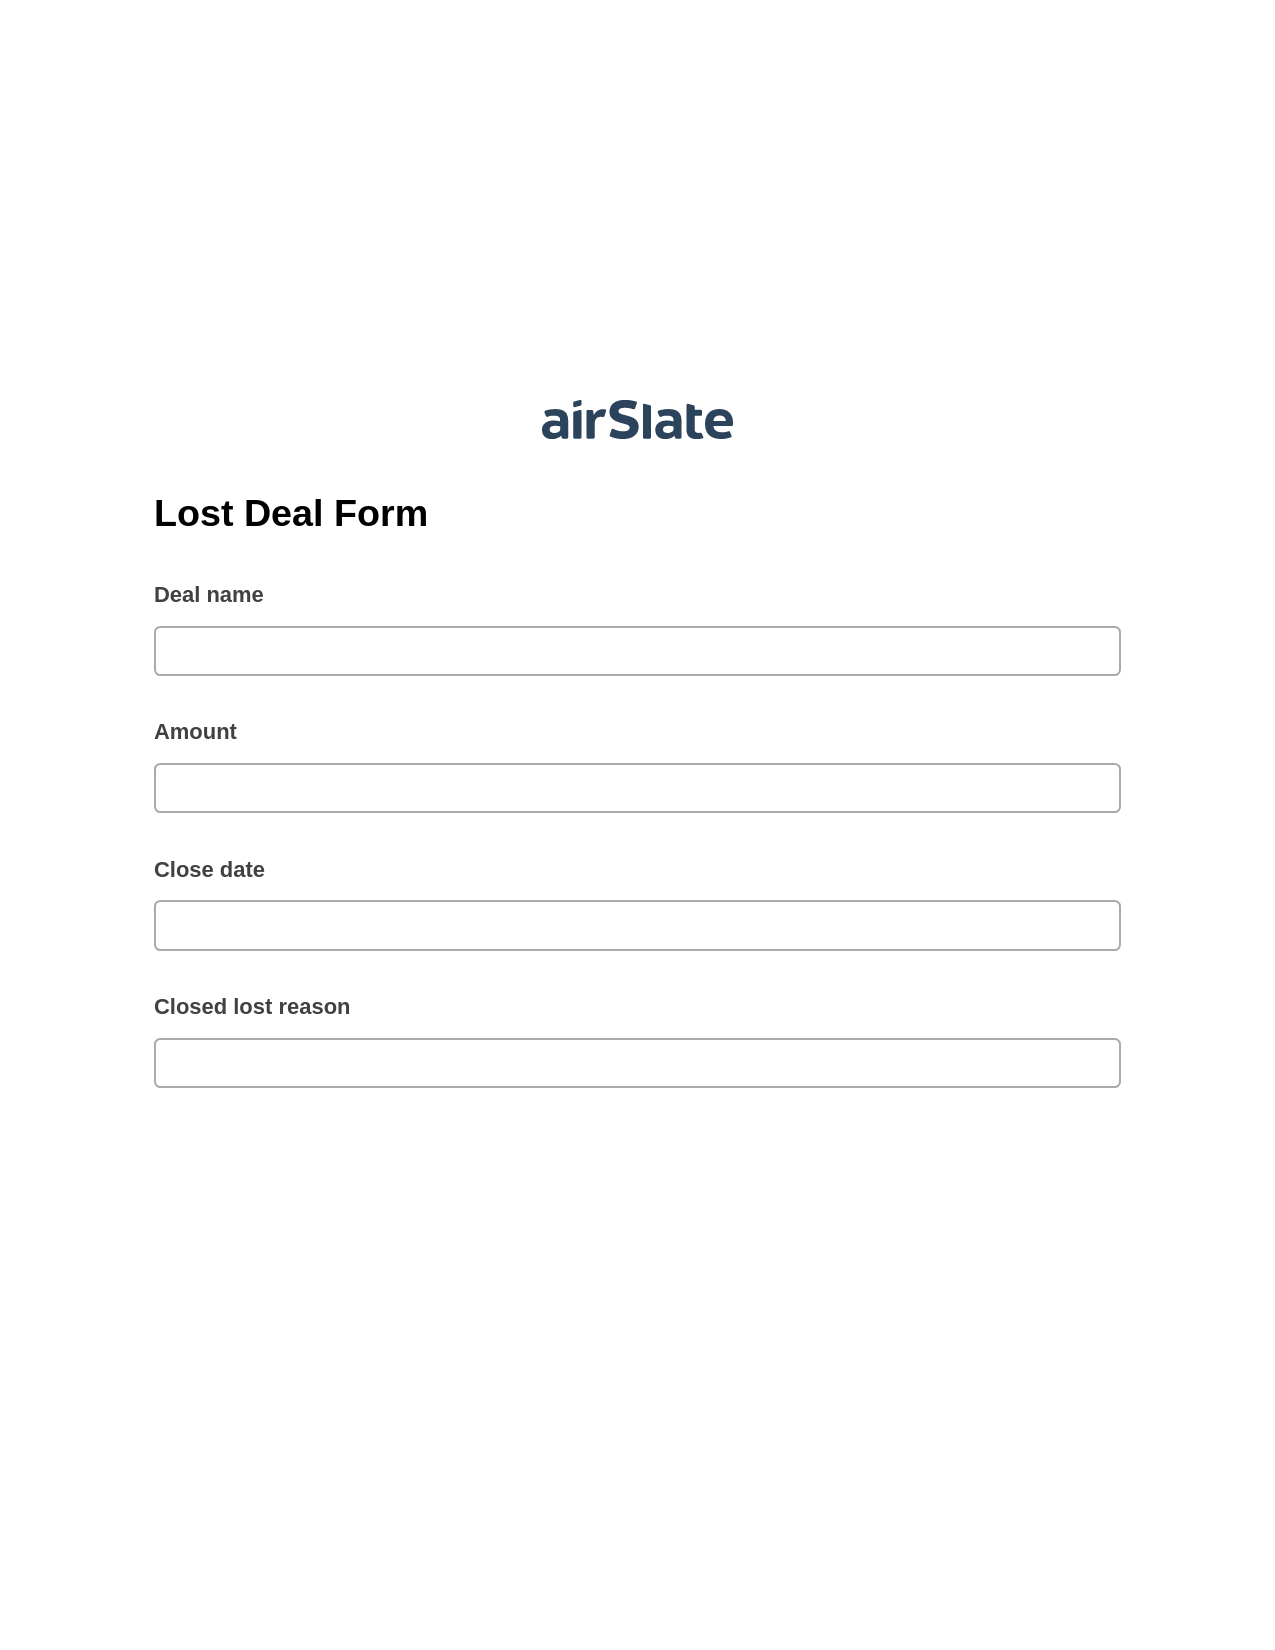 Lost Deal Form Pre-fill from Salesforce Records Bot, Hide Signatures Bot, Export to Excel 365 Bot